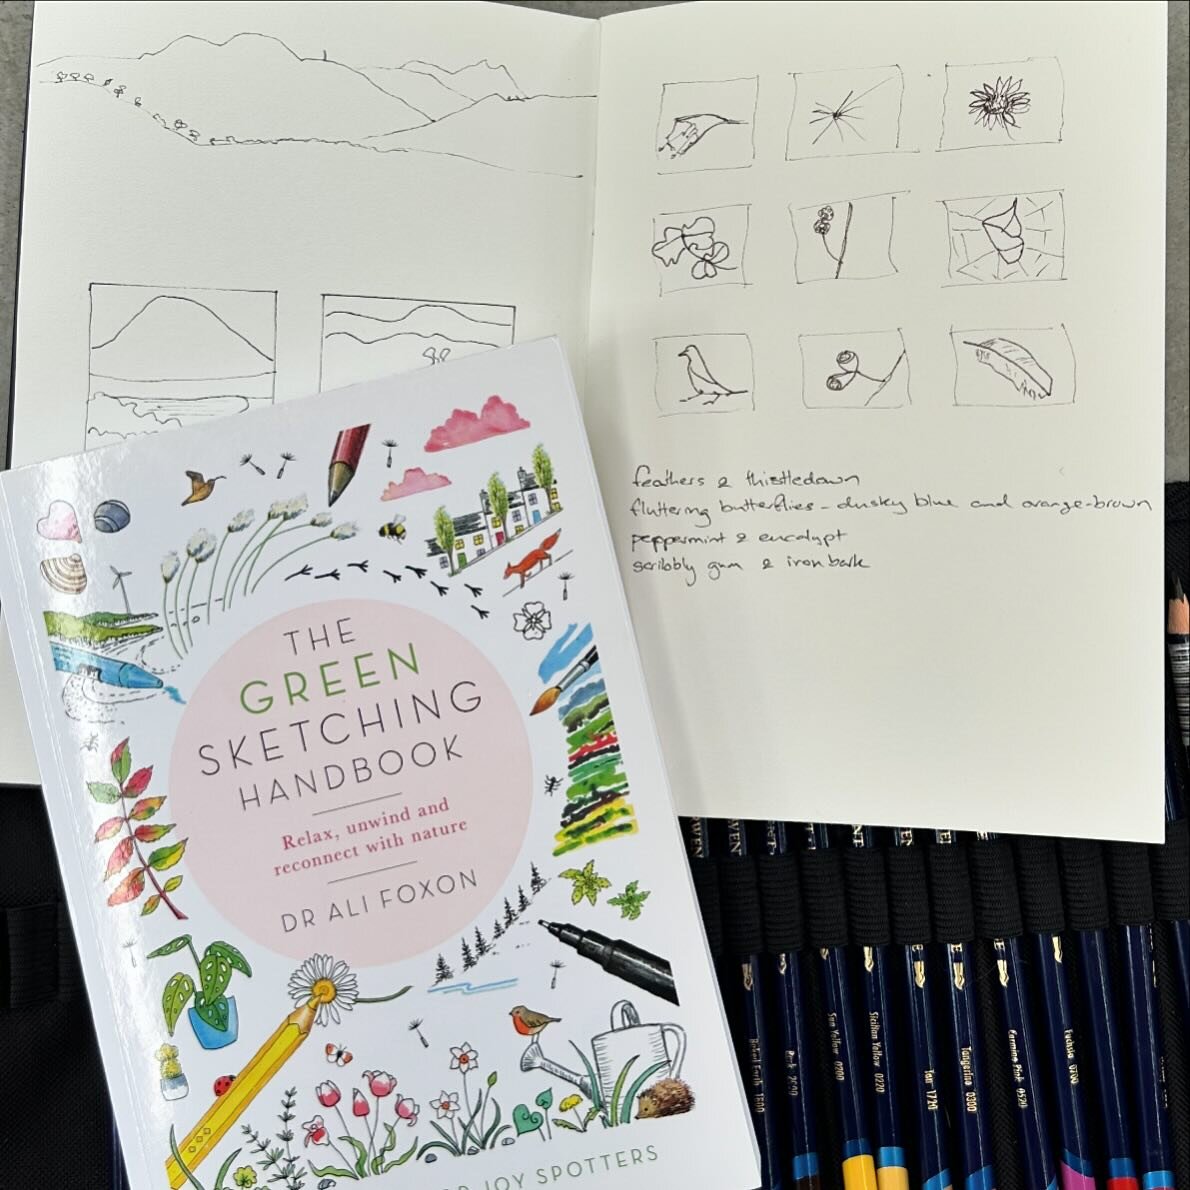 I highly recommend The Green Sketching Handbook by @ali_foxon, even if you don&rsquo;t think you can draw but want a way to experience more joy and calm and connect to nature. It really works. 
One of the principles is you don&rsquo;t need to show yo